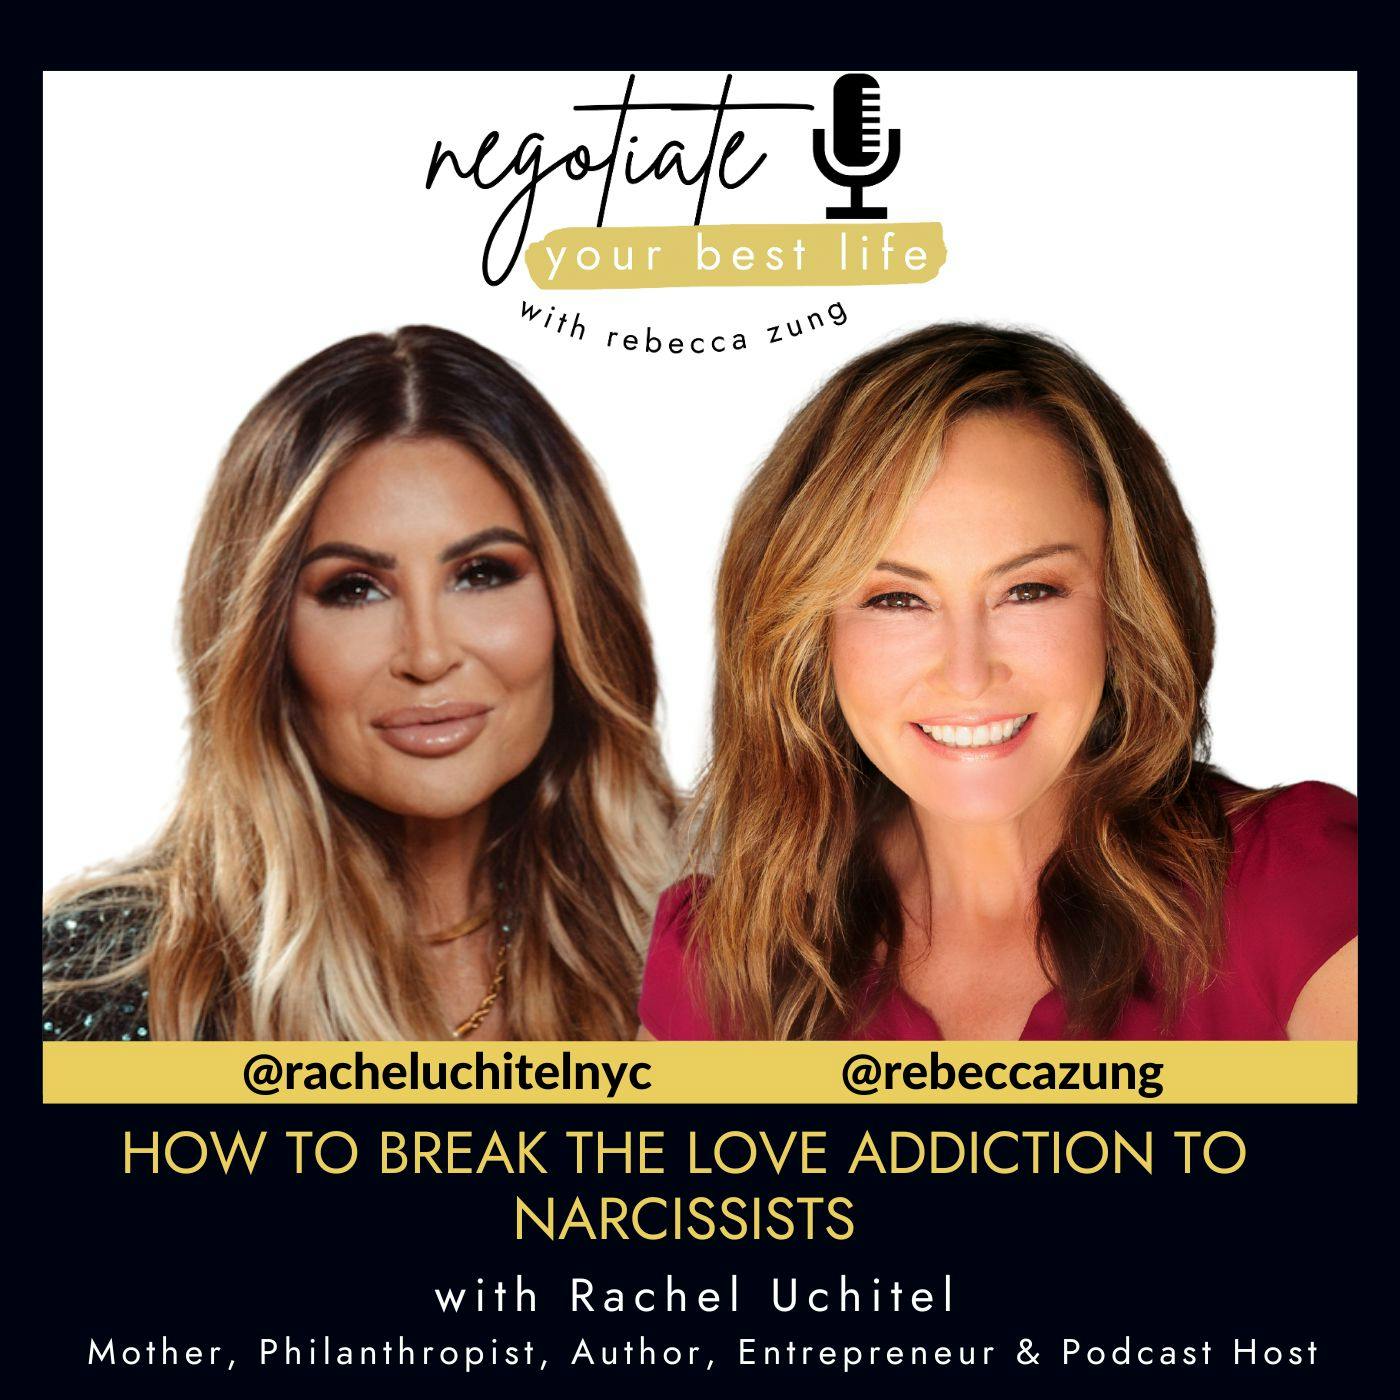 How to Break the Love Addiction to Narcissists with Guest Rachel Uchitel and Rebecca Zung on Negotiate Your Best Life #500